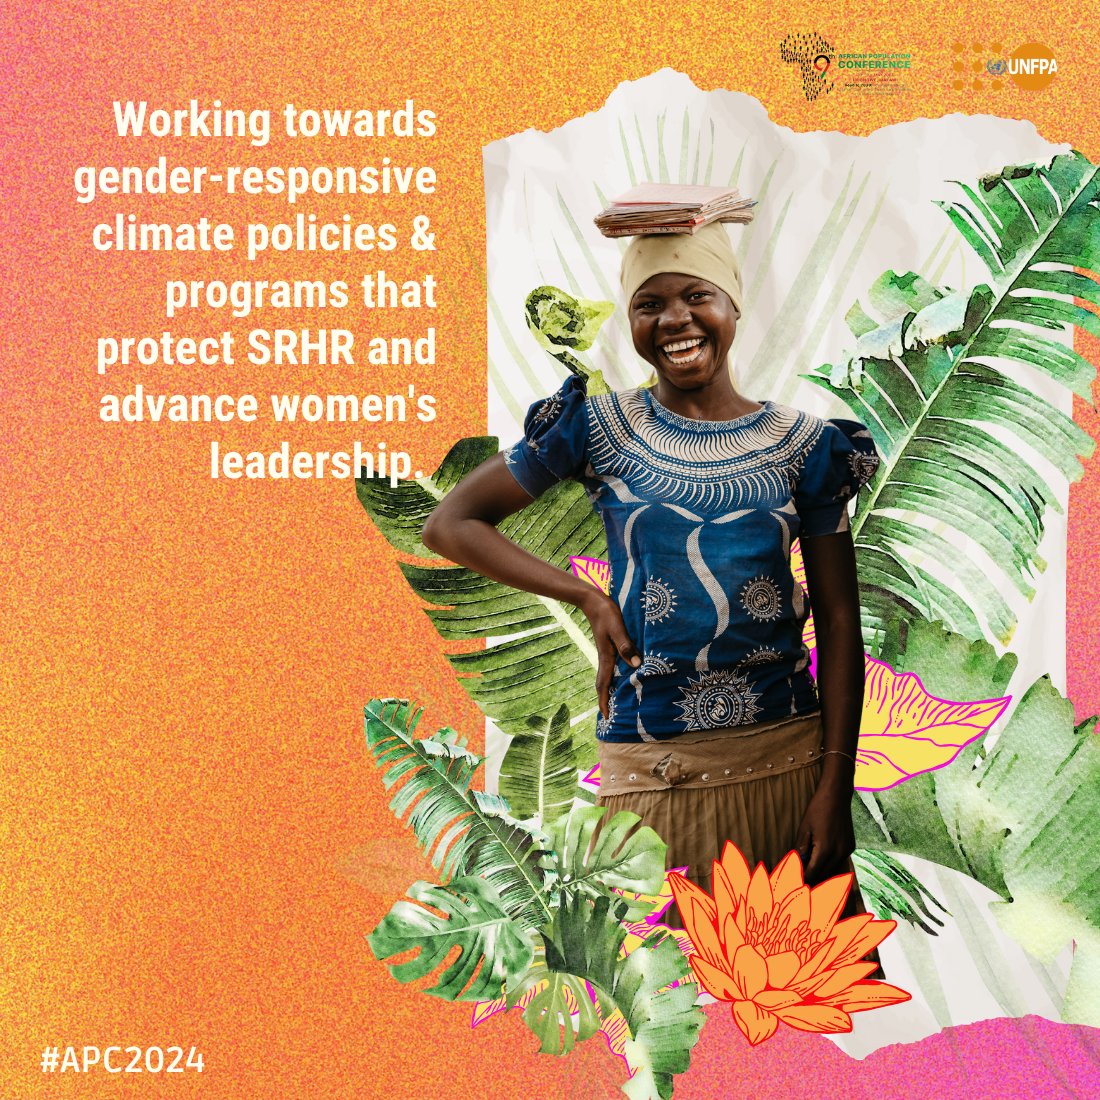 The climate crisis disproportionately affects women and girls, especially their sexual and reproductive health. At #APC2024, UNFPA is sharing experiences and advocating for climate-resilient SRHR policies and programs.